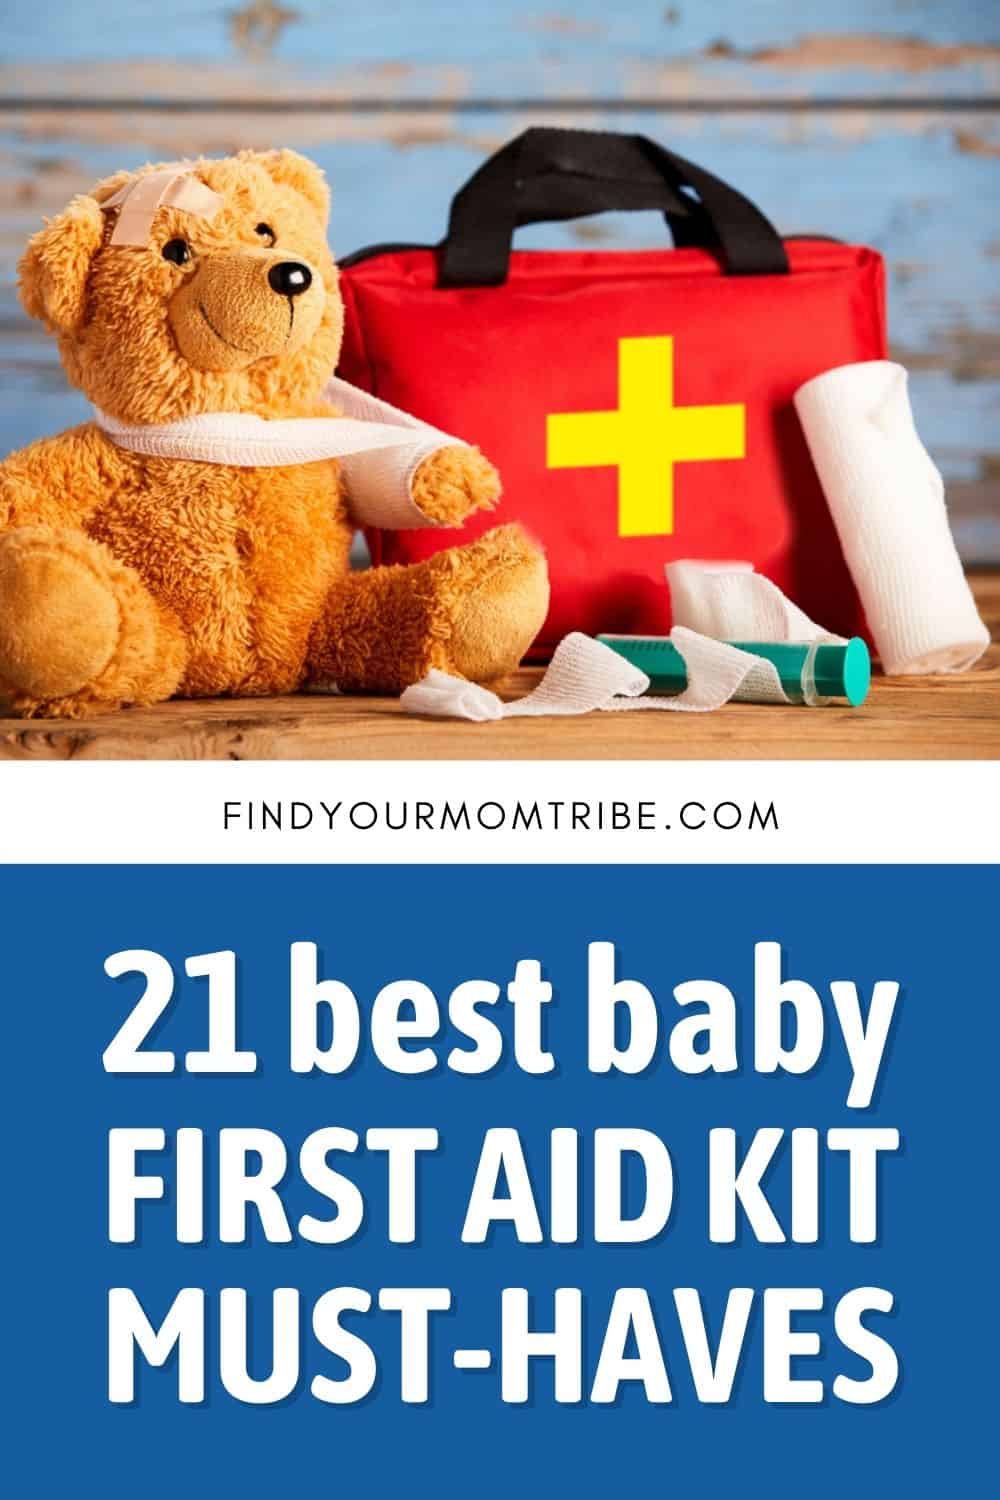 21 Best Baby First Aid Kit Must-Haves Pinterest